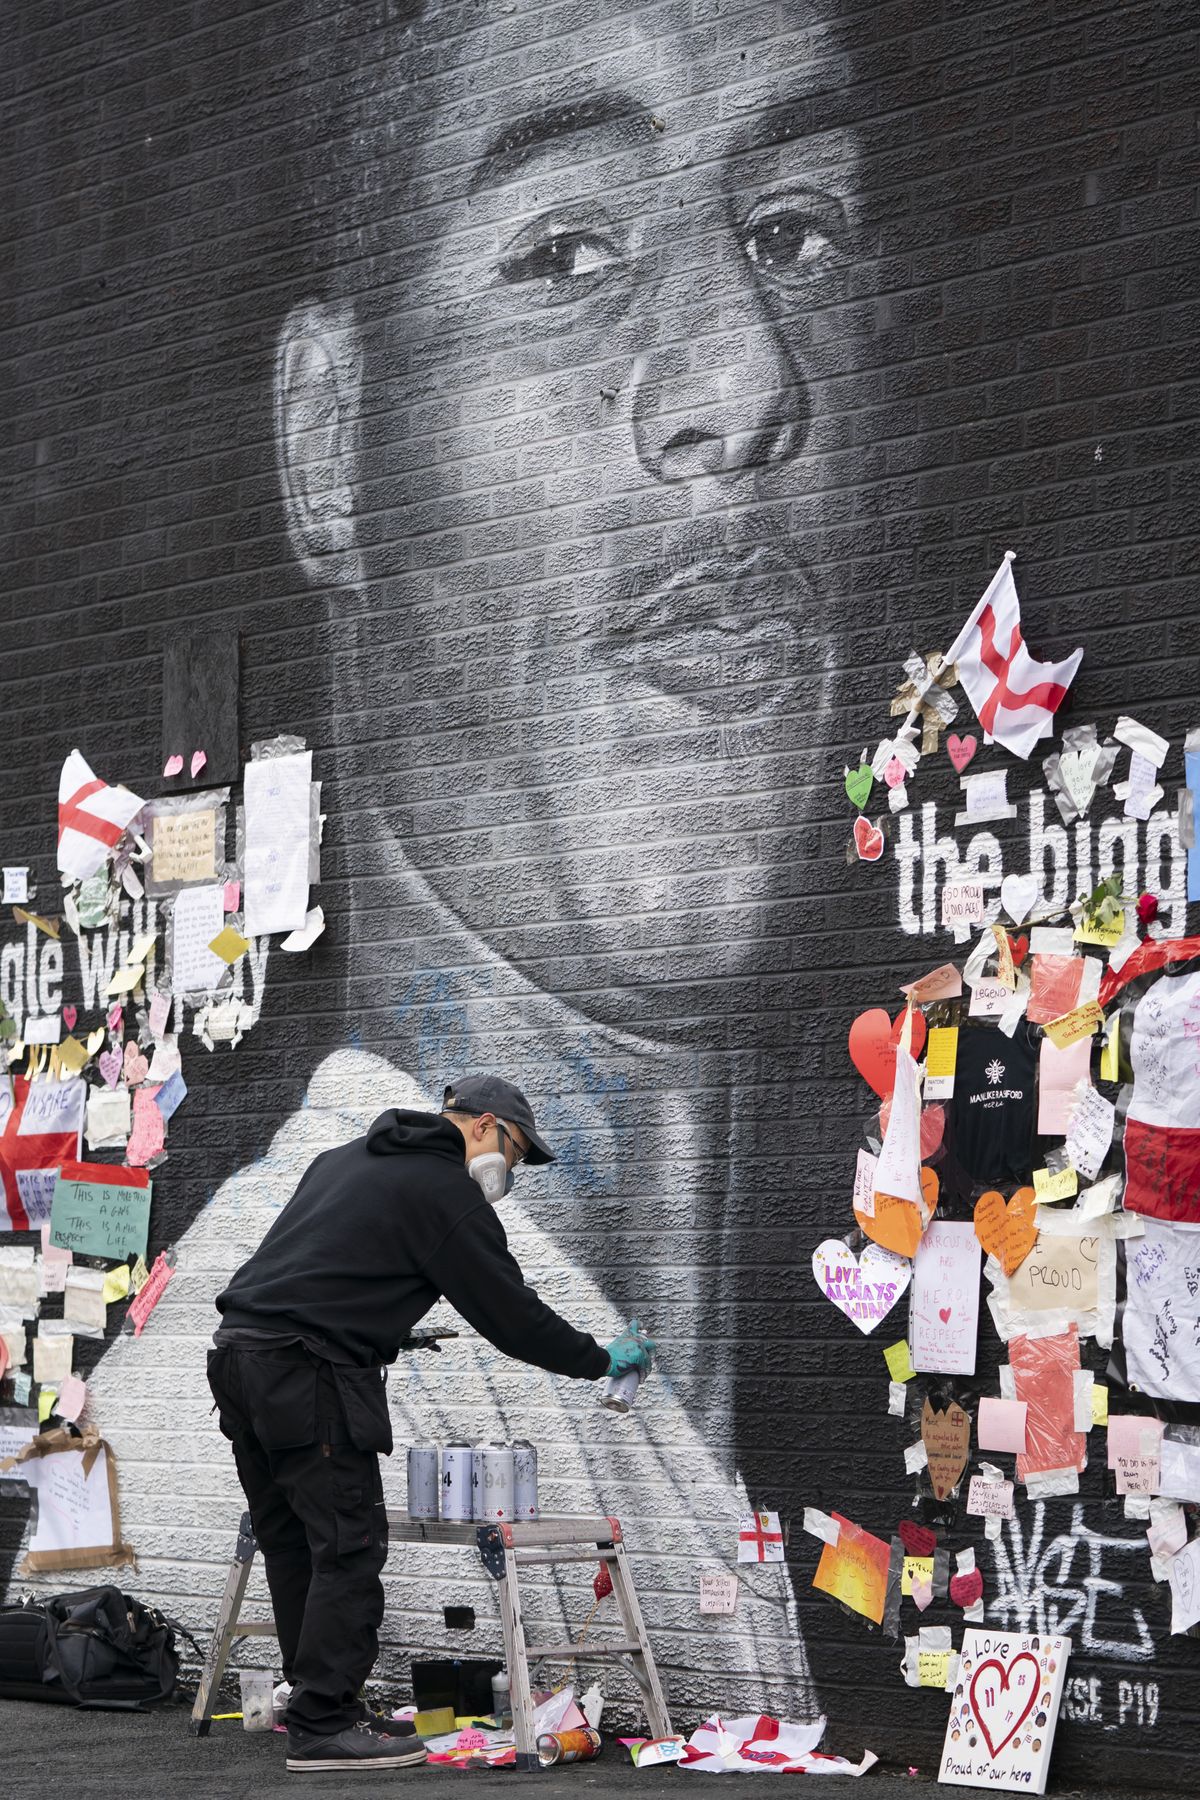 AT LEFT: Street artist Akse P19 repairs the mural of Manchester United striker and England player Marcus Rashford on the wall of the Coffee House Cafe on Copson Street on Tuesday in Withington, Manchester, England. The mural was defaced with graffiti in the wake of England losing the Euro 2020 soccer championship final match to Italy, but subsequently covered with messages of support by well wishers.  (Jon Super)